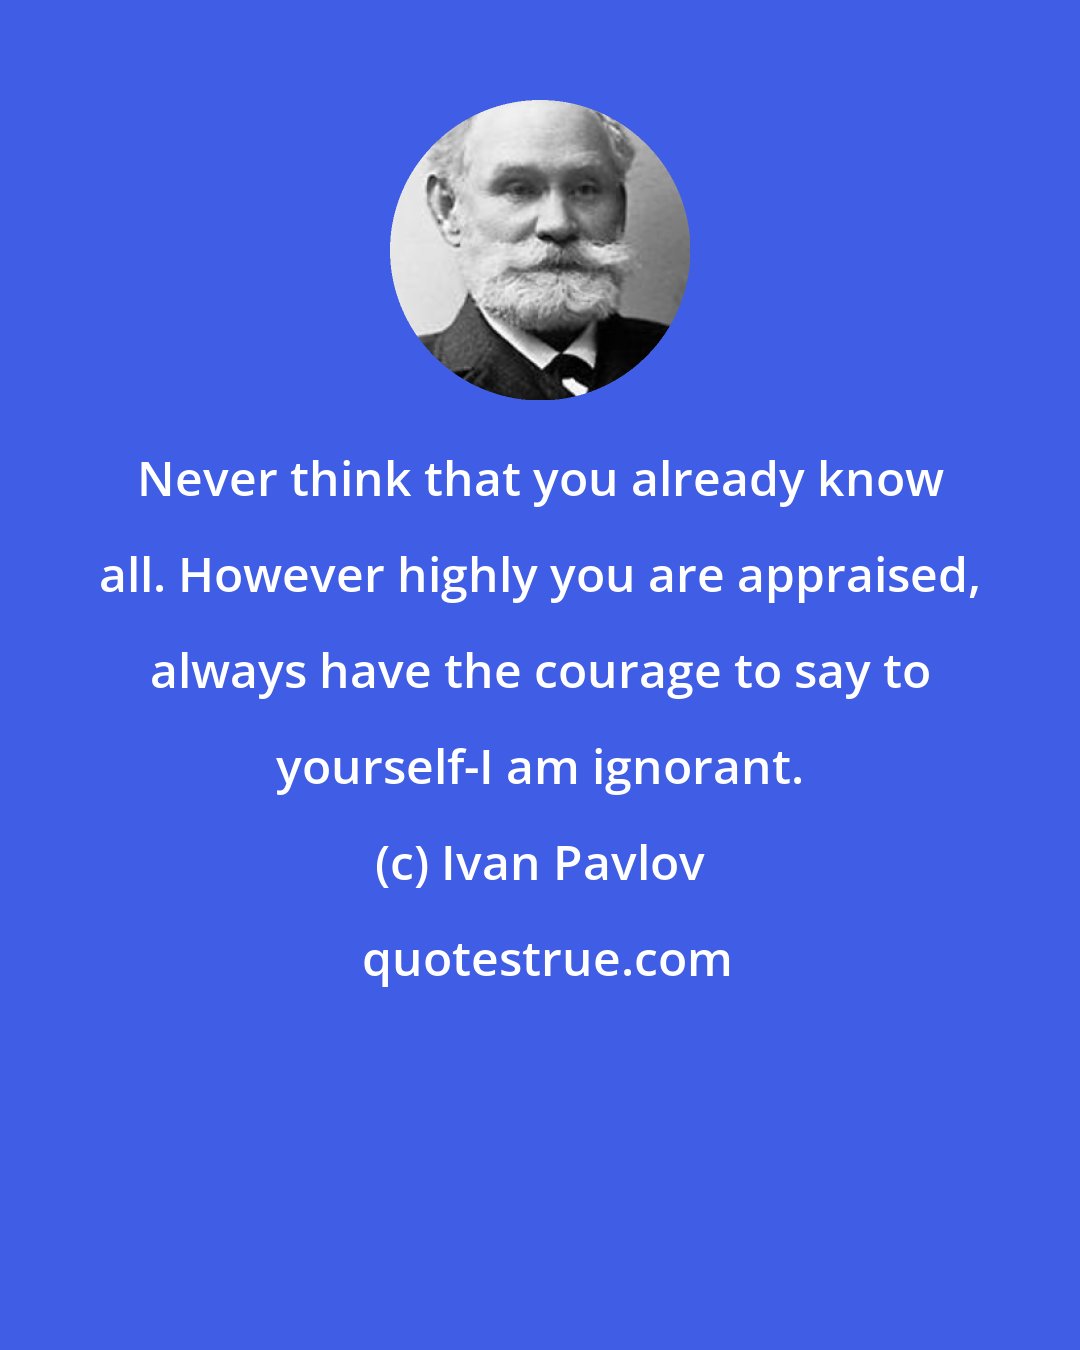 Ivan Pavlov: Never think that you already know all. However highly you are appraised, always have the courage to say to yourself-I am ignorant.